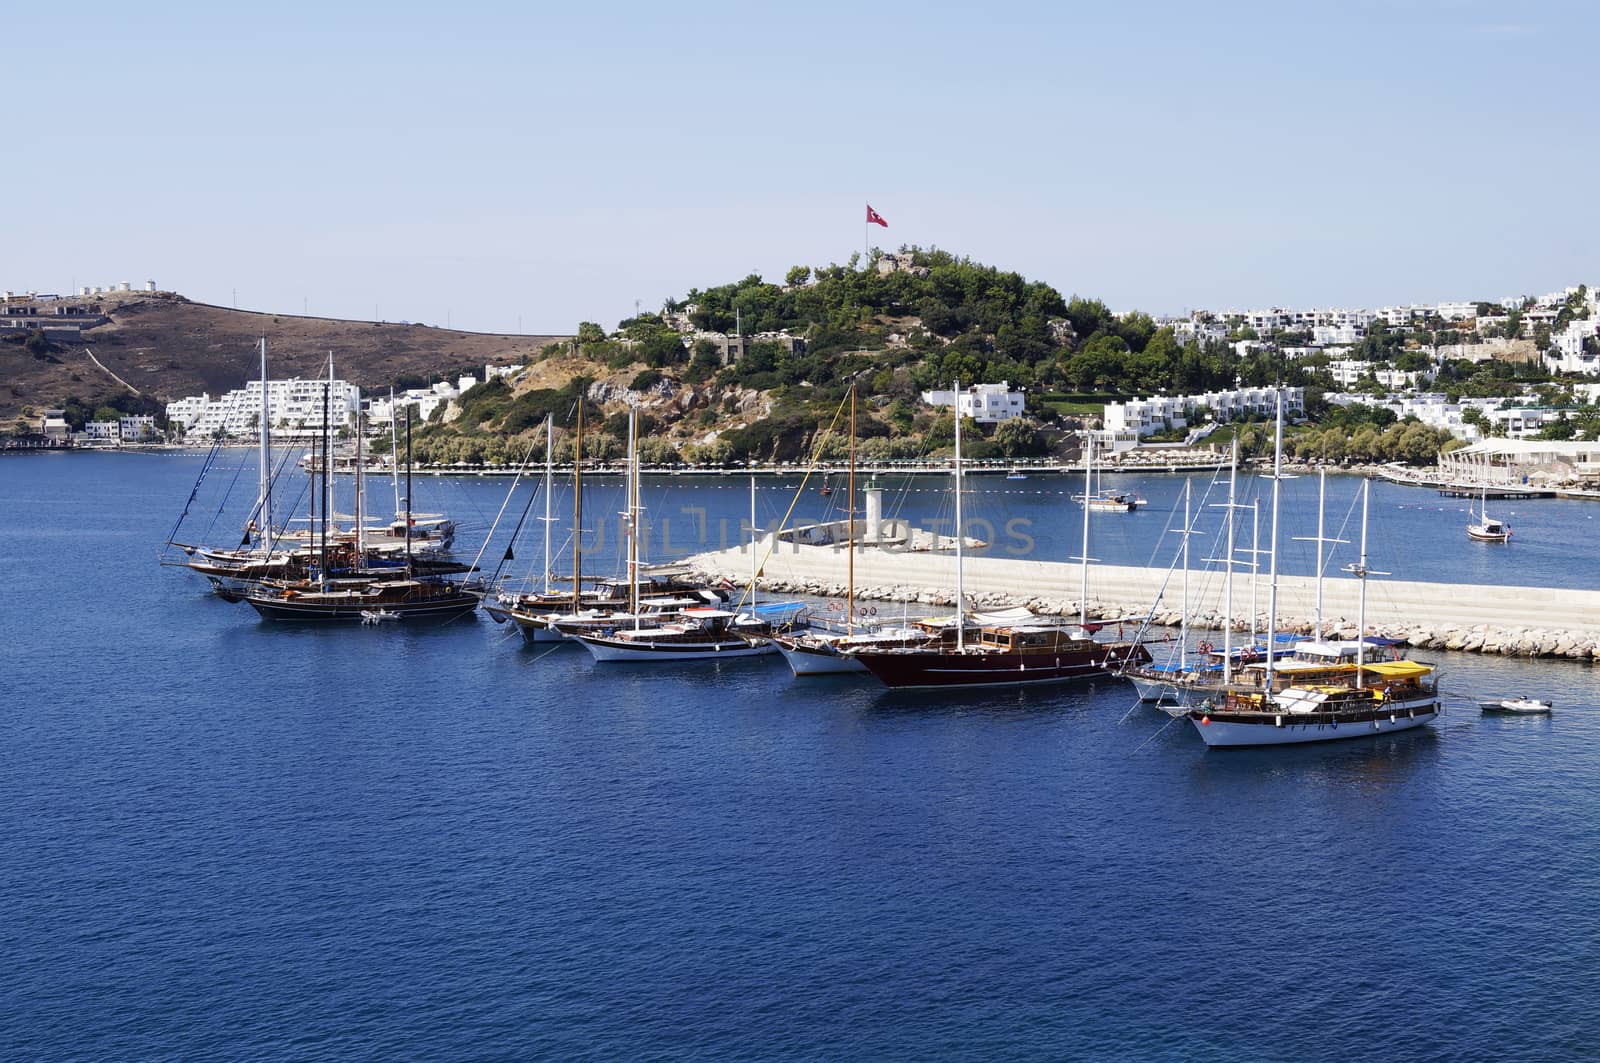 Boats in Bodrum marina by magraphics